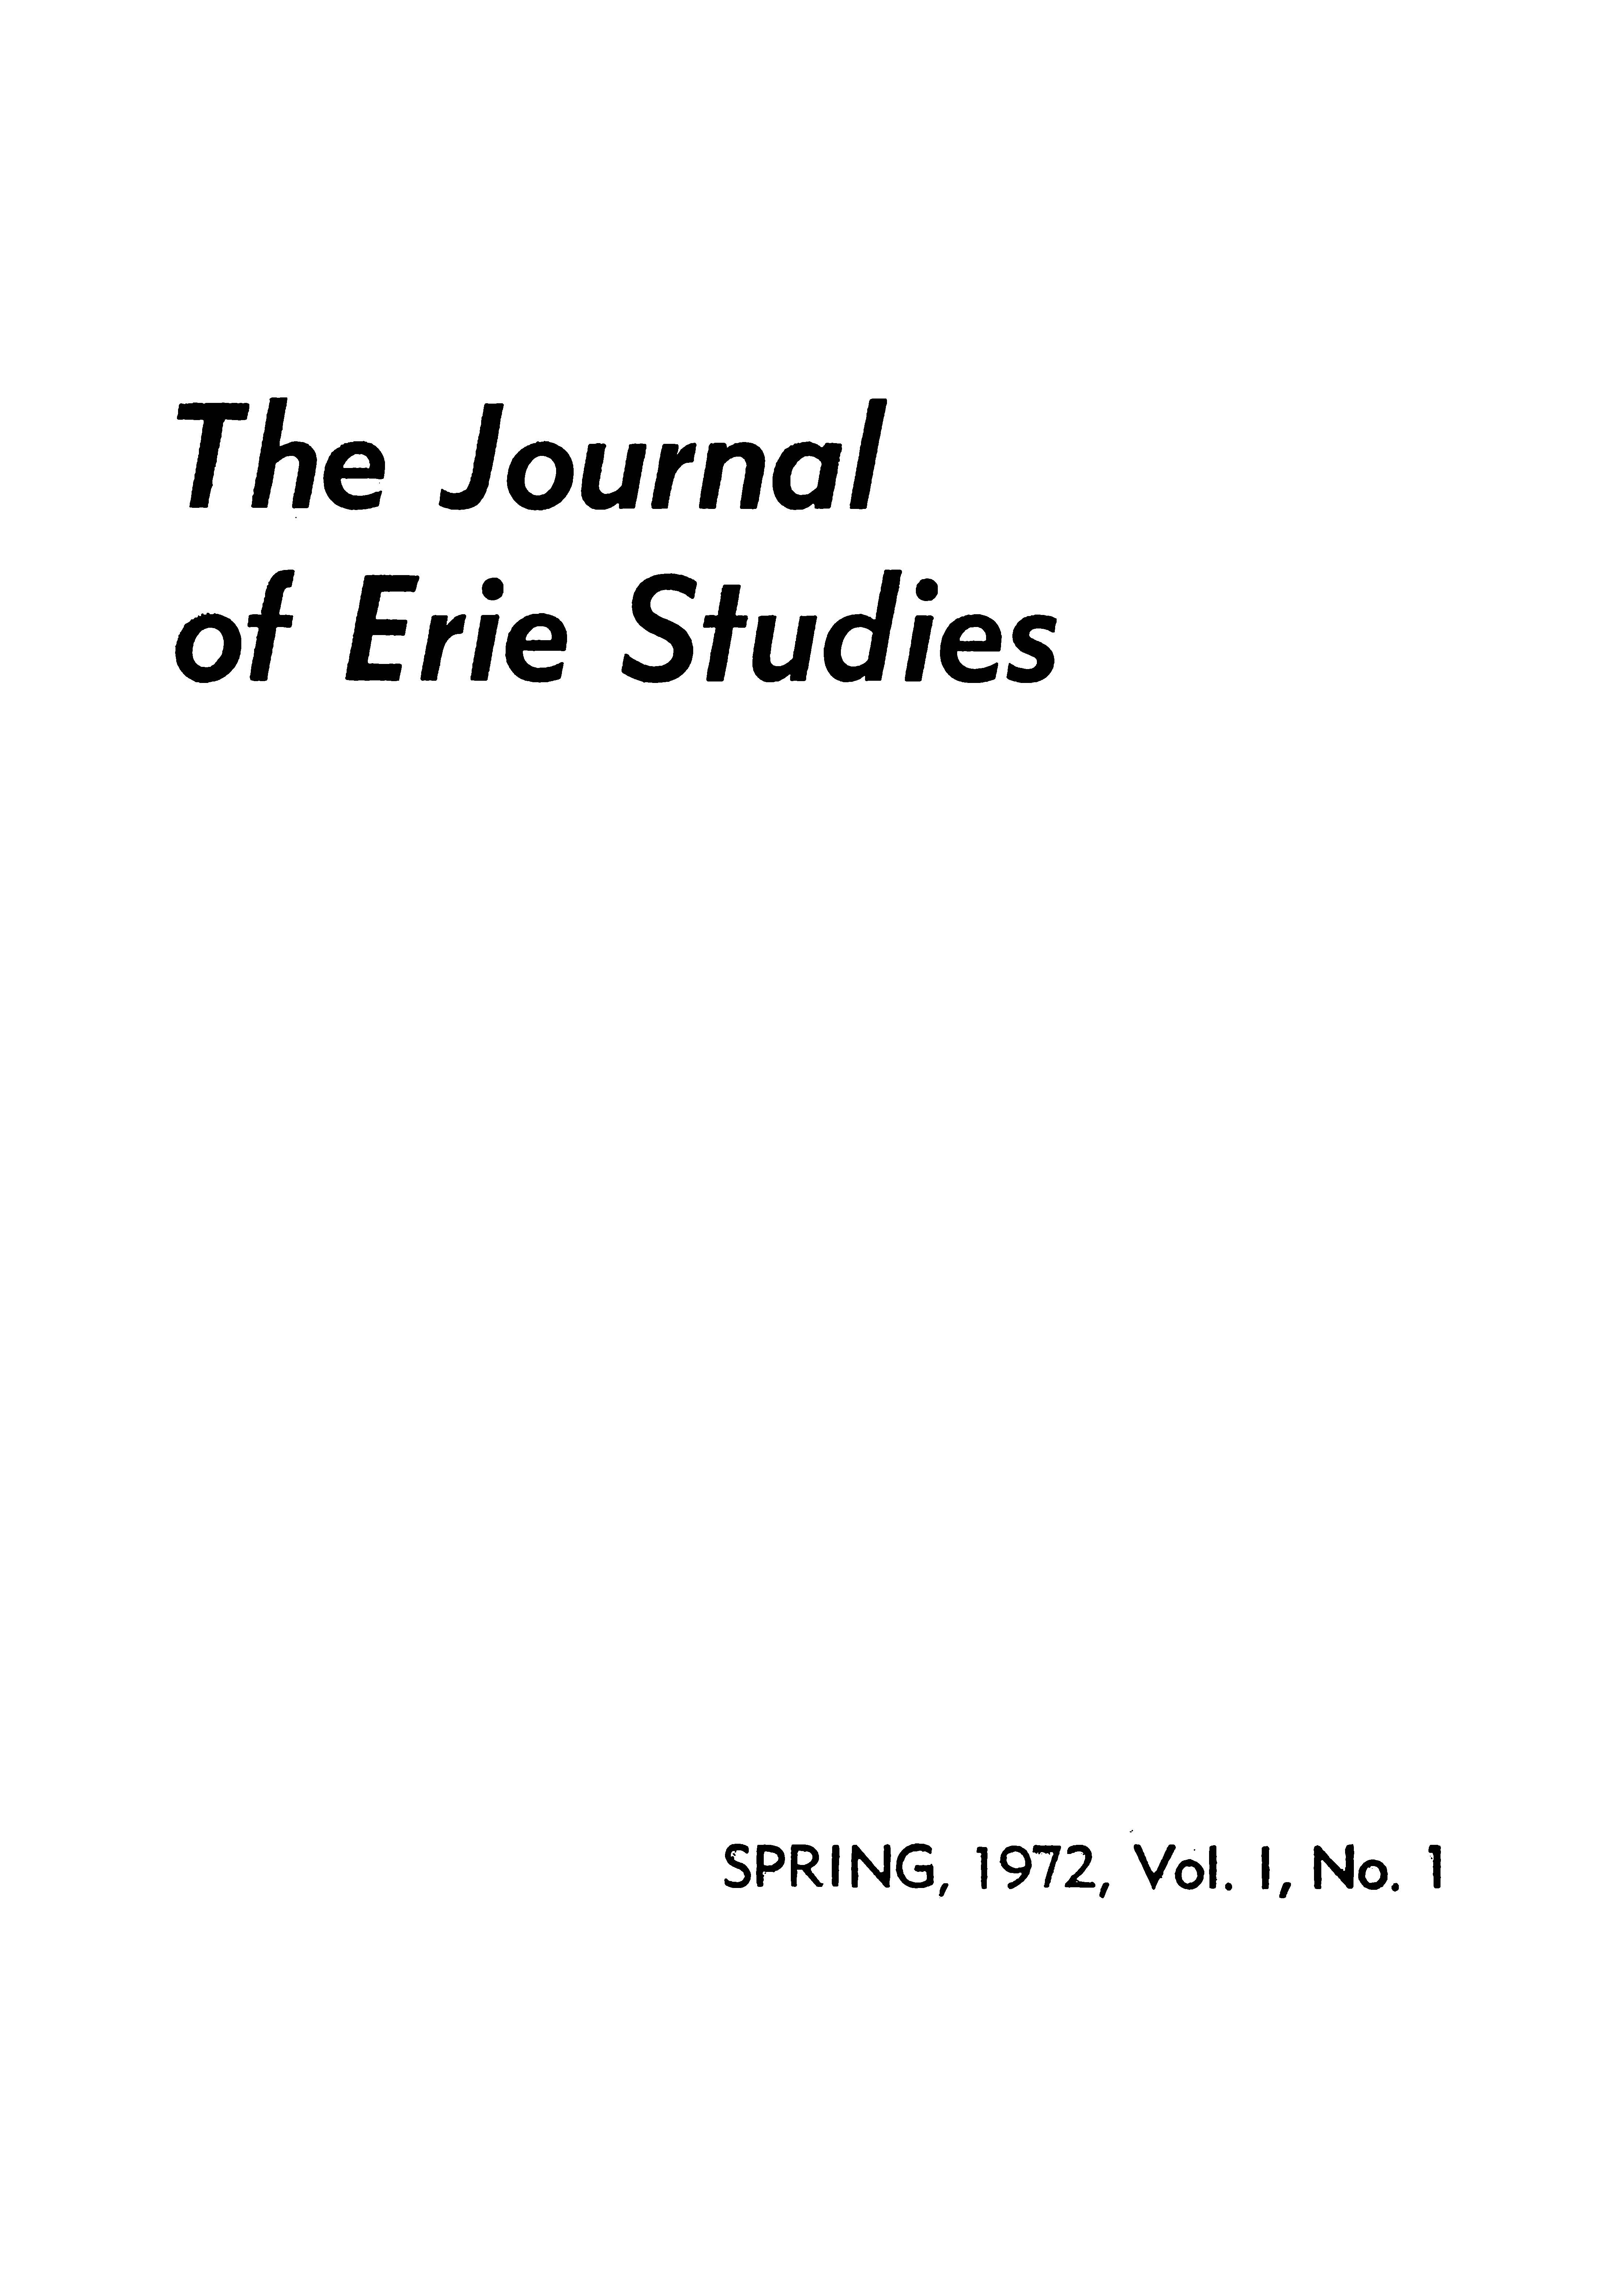 Cover of the spring 1972 issue of The Journal of Erie Studies.